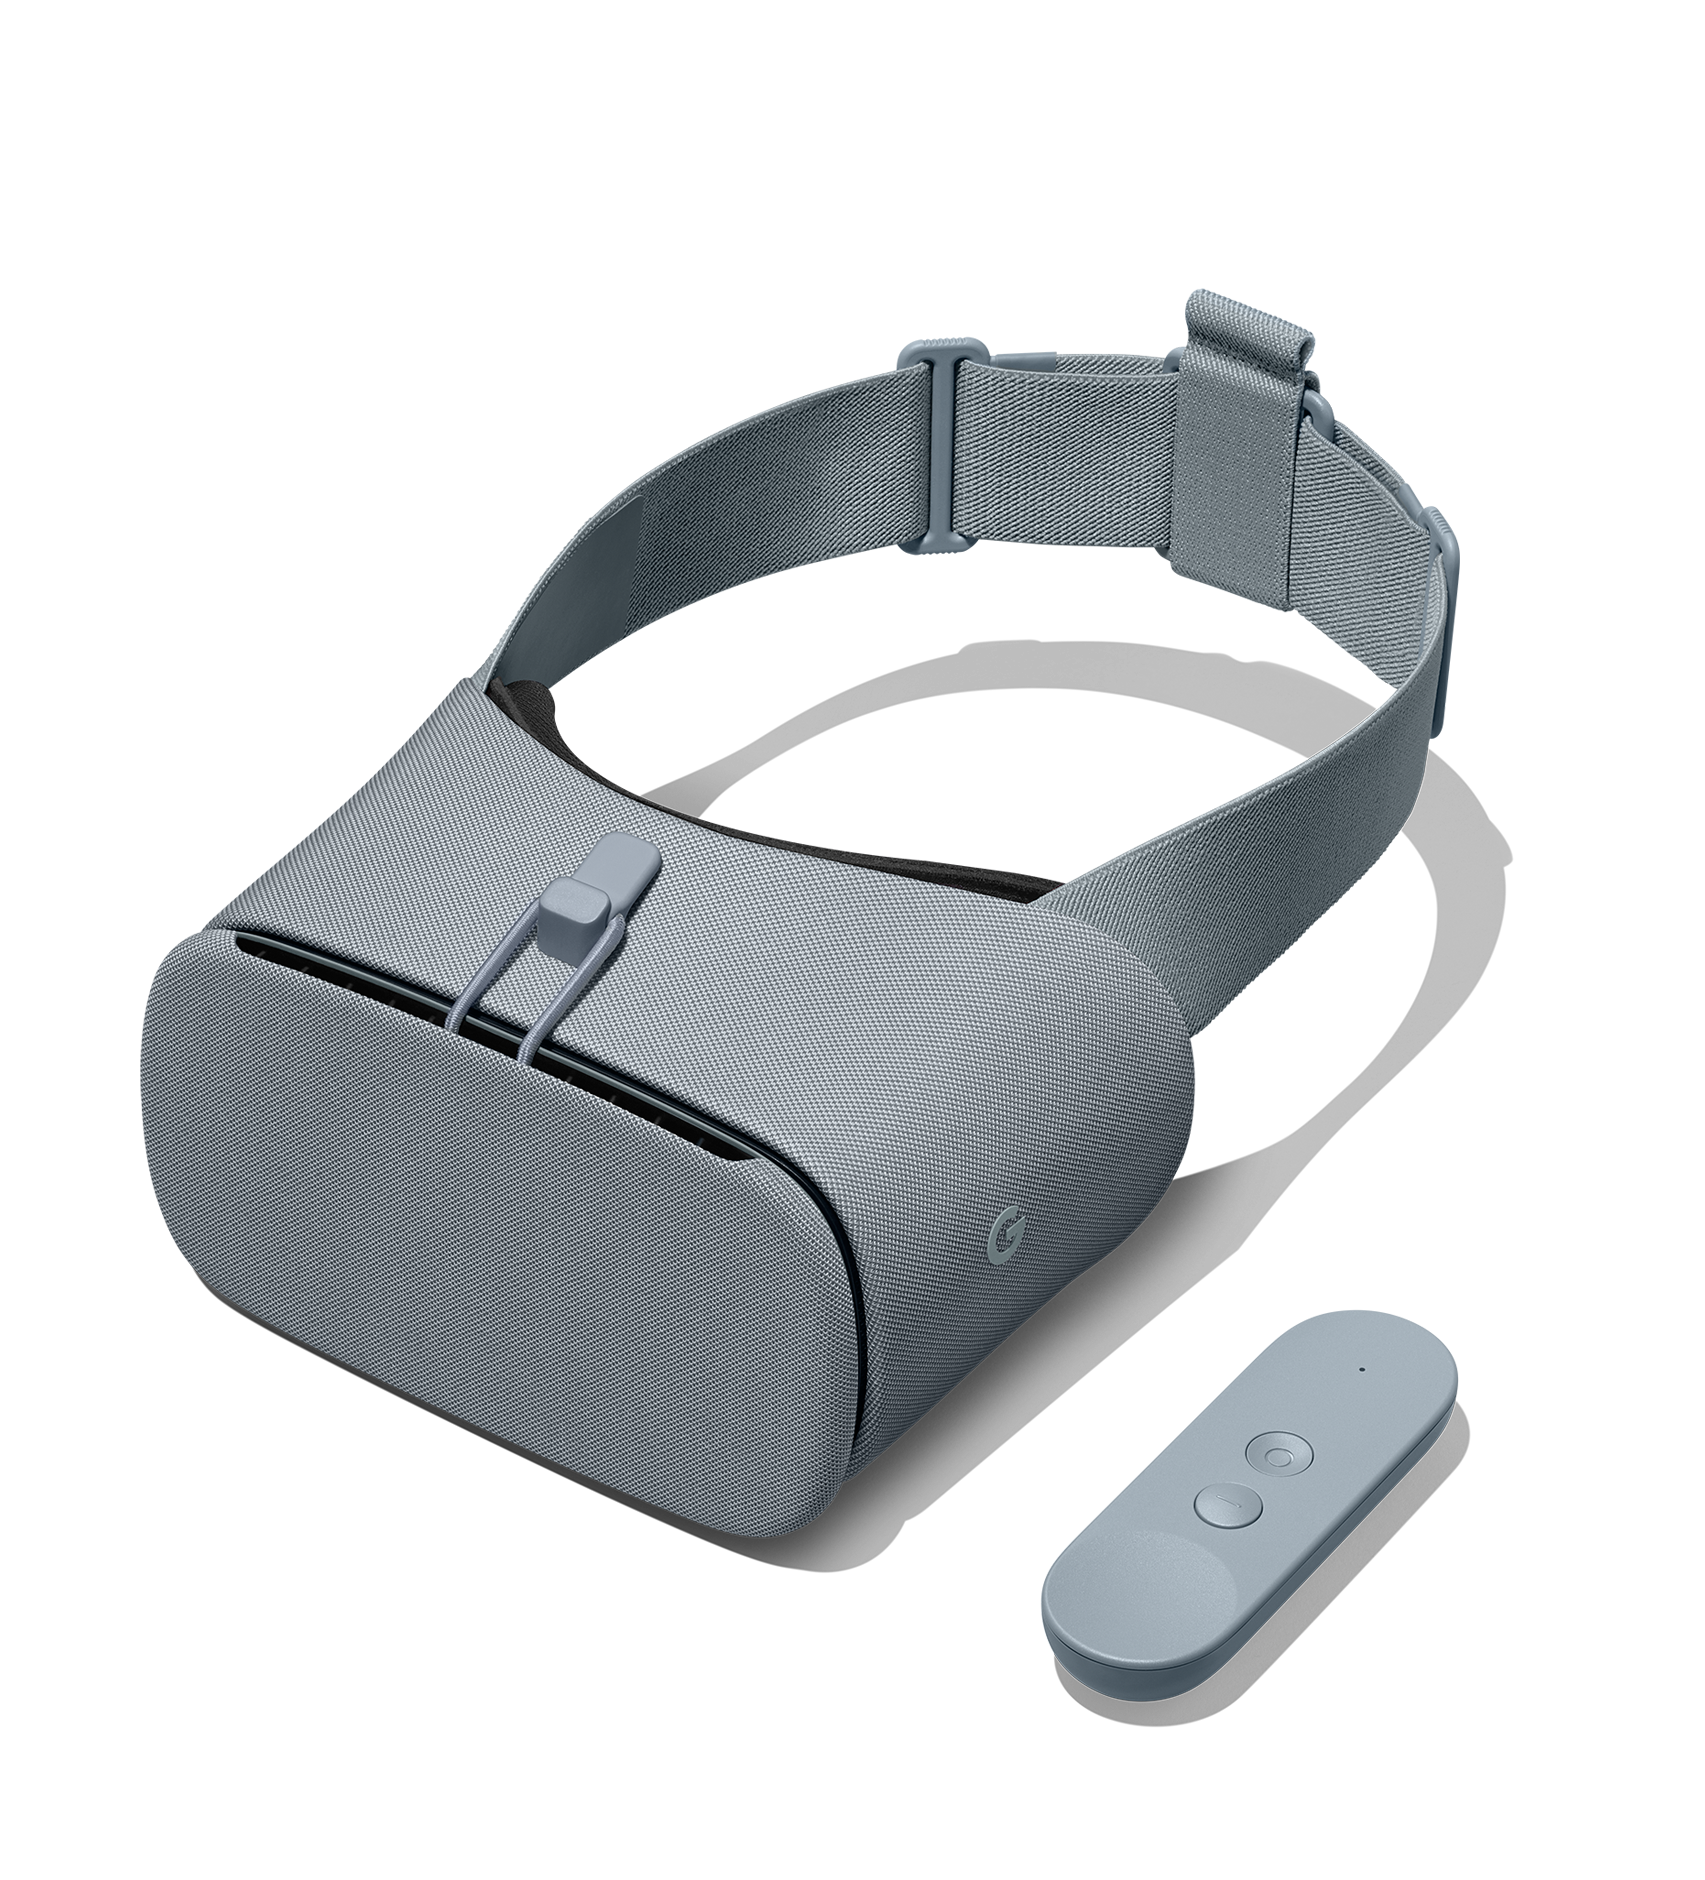 Google Daydream View VR Drops In End of Google VR? - VRGear.com